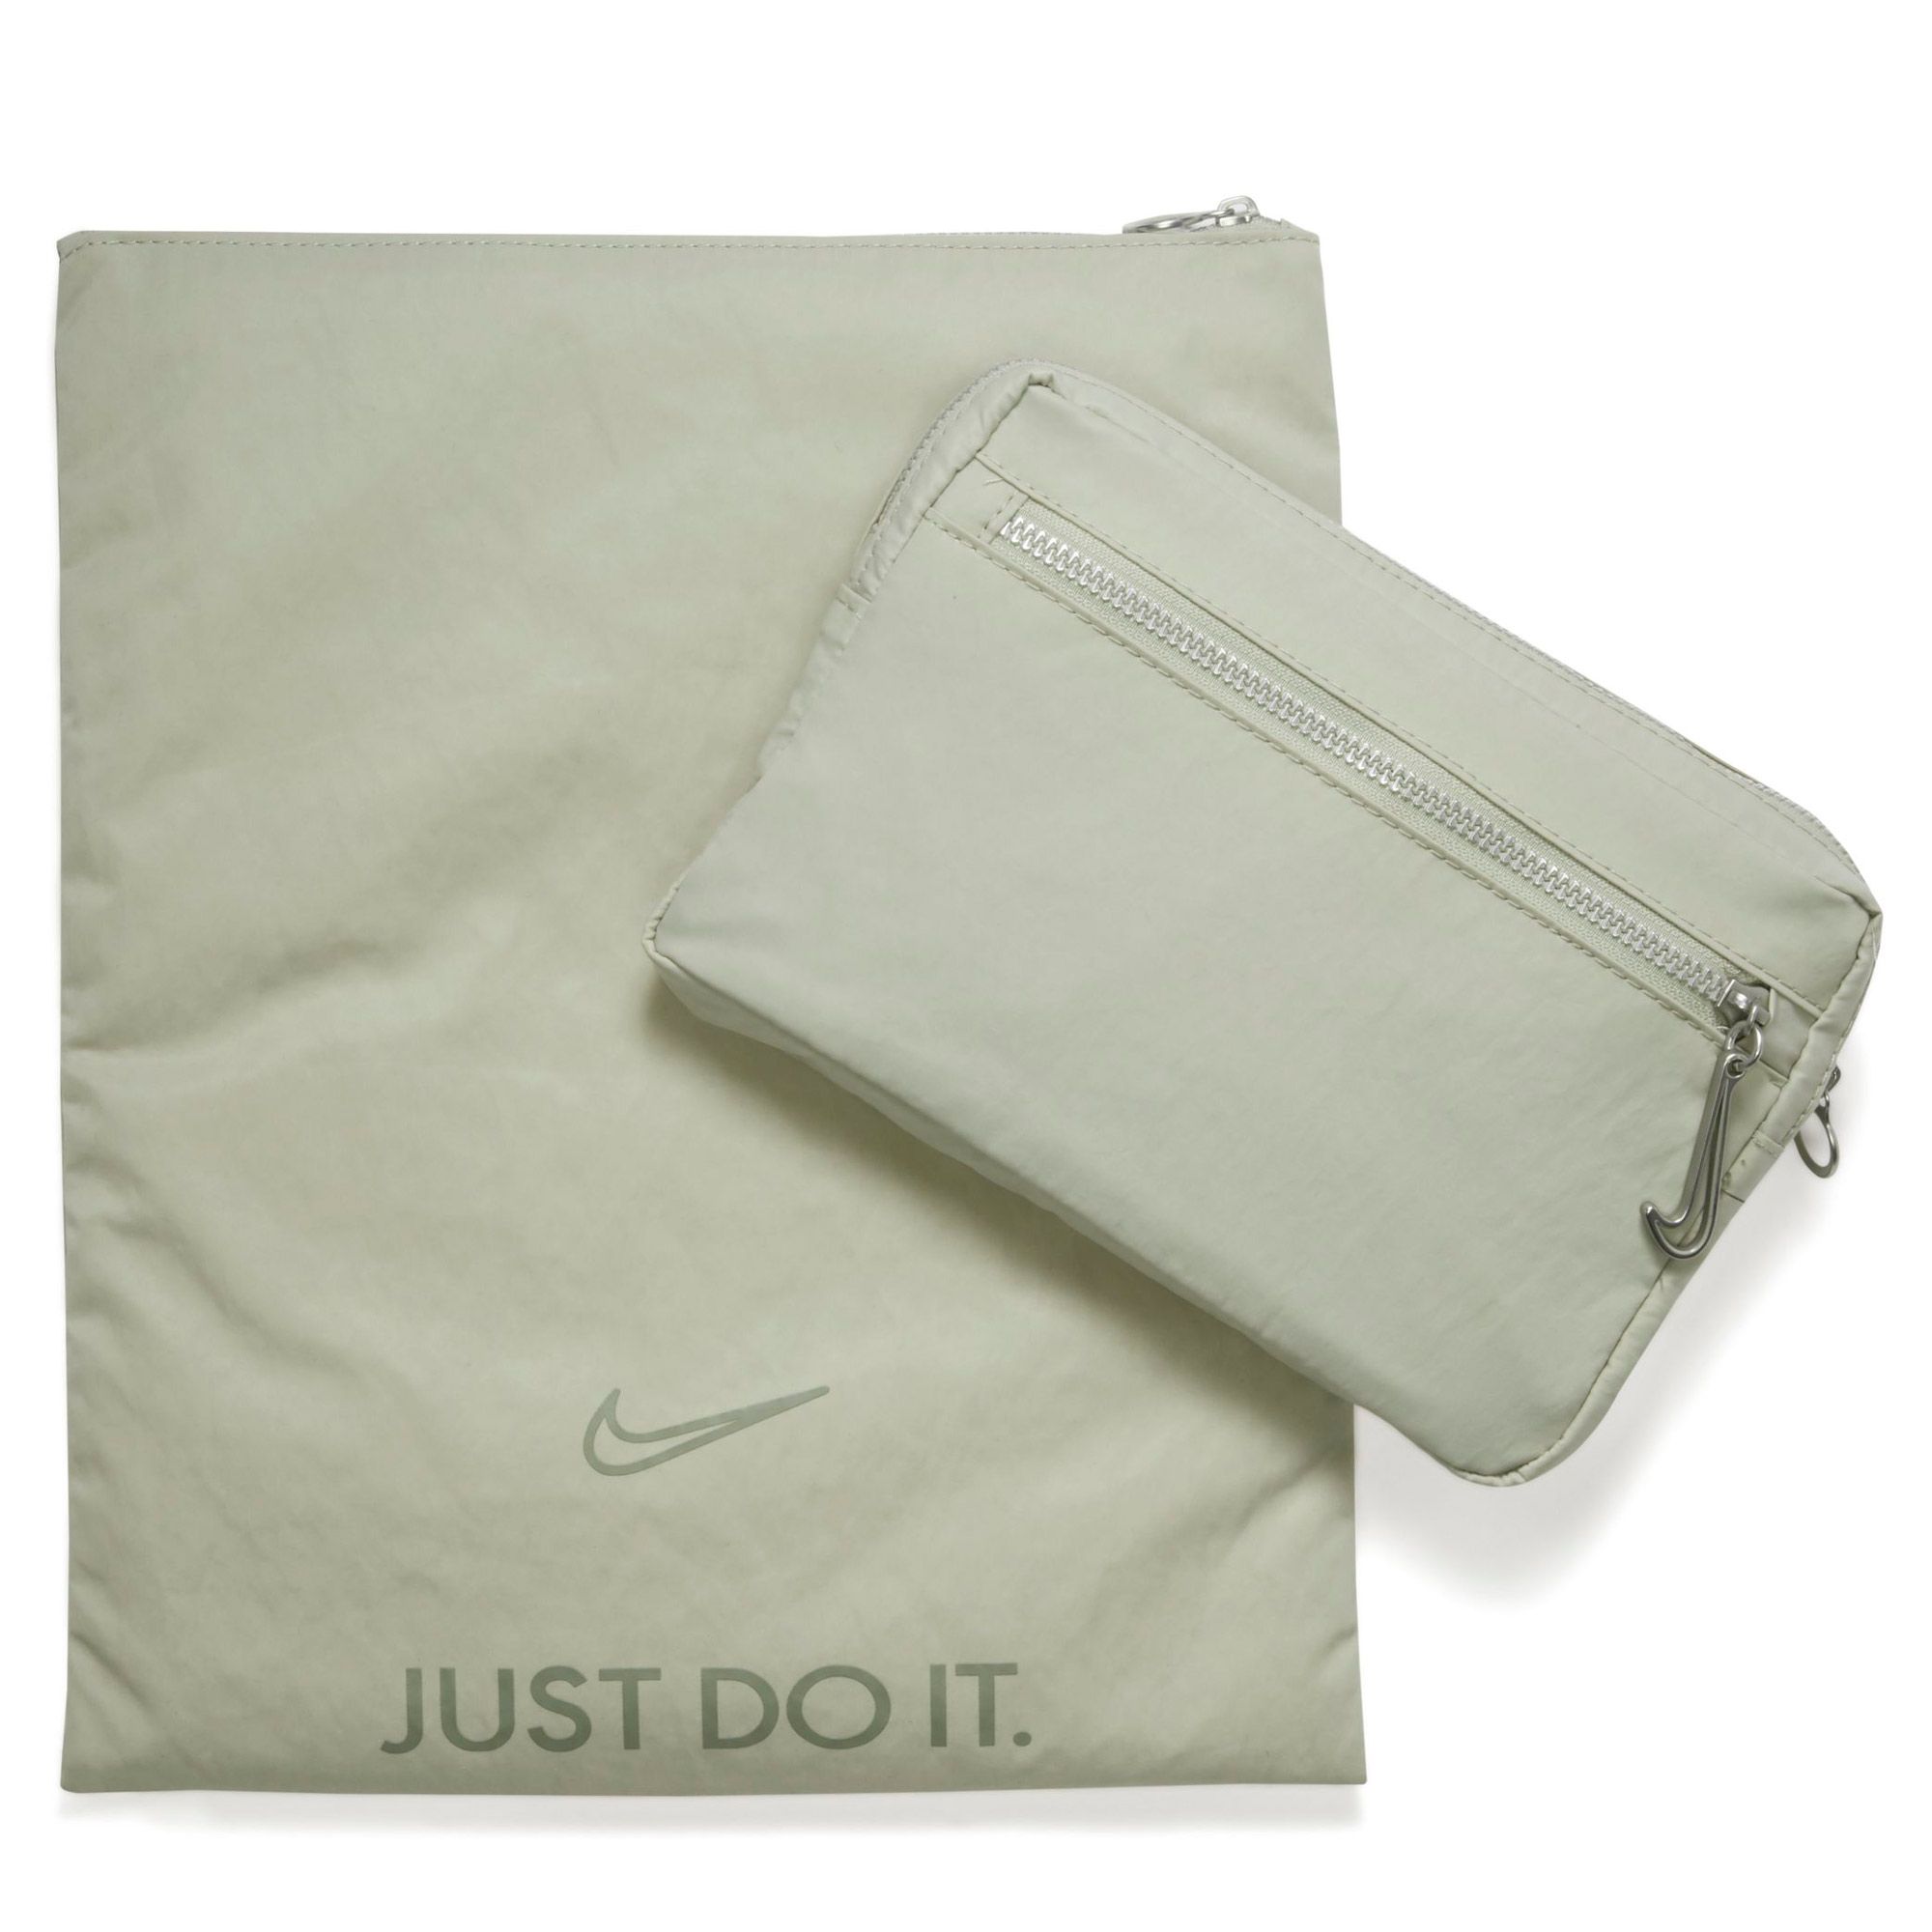 Nike Luxe Bag on Sale, SAVE 52% 